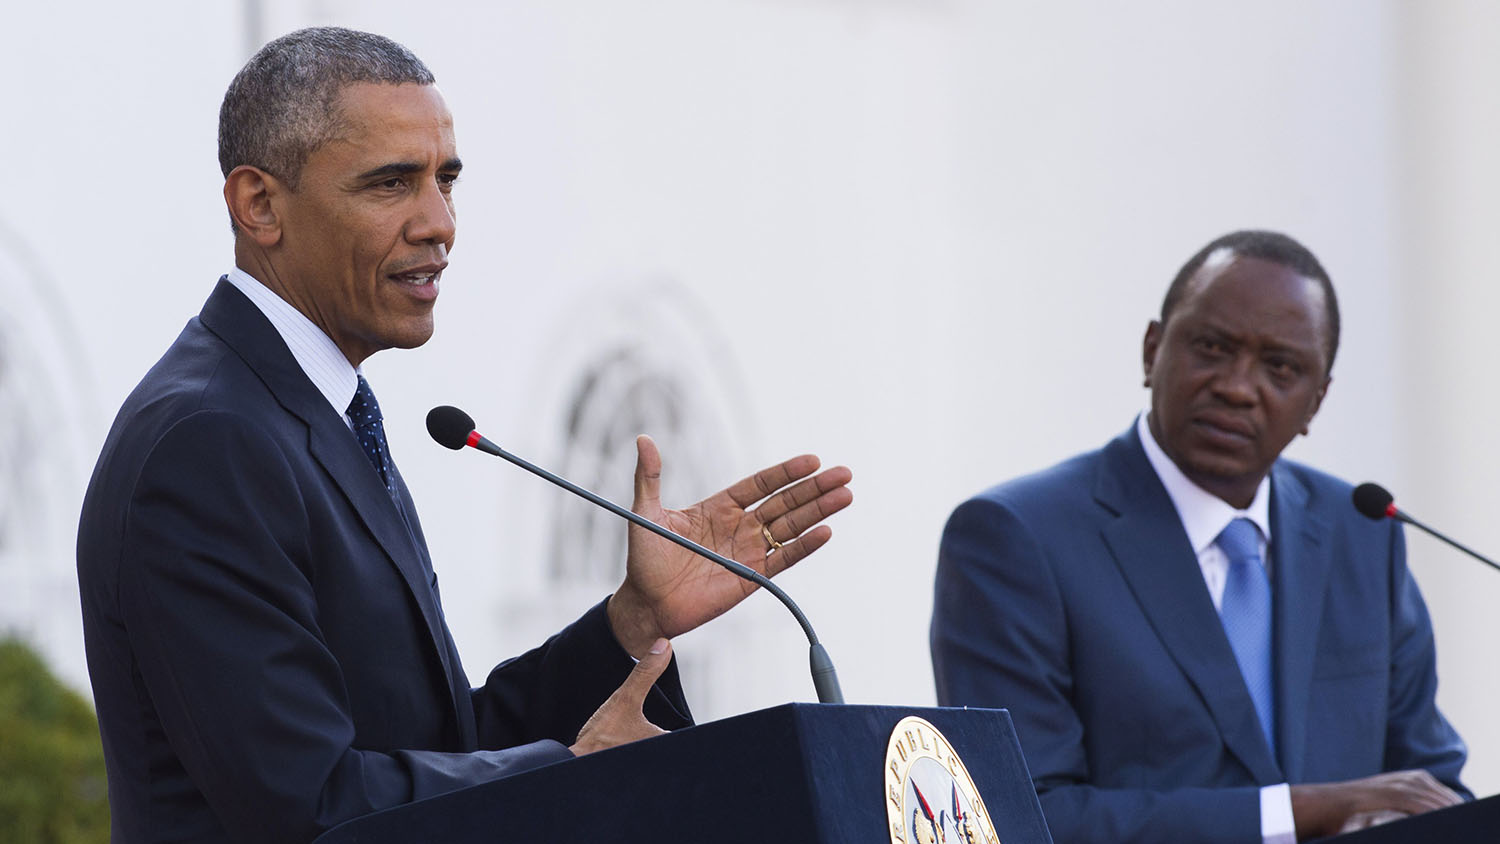 US President Barack Obama (L) and his Kenyan counterpart Uhuru Kenyatta give a joint press conference afteir their talks at the State House in Nairobi on July 25, 2015. In a joint press conference after talks with Kenyan President Uhuru Kenyatta, Obama pushed a tough message on Kenyan corruption, the civil war in South Sudan, controversial elections in Burundi and the fight against Somalia's Al-Qaeda-affiliated Shebab militants. AFP PHOTO / SAUL LOEB (Photo credit should read SAUL LOEB/AFP/Getty Images)
